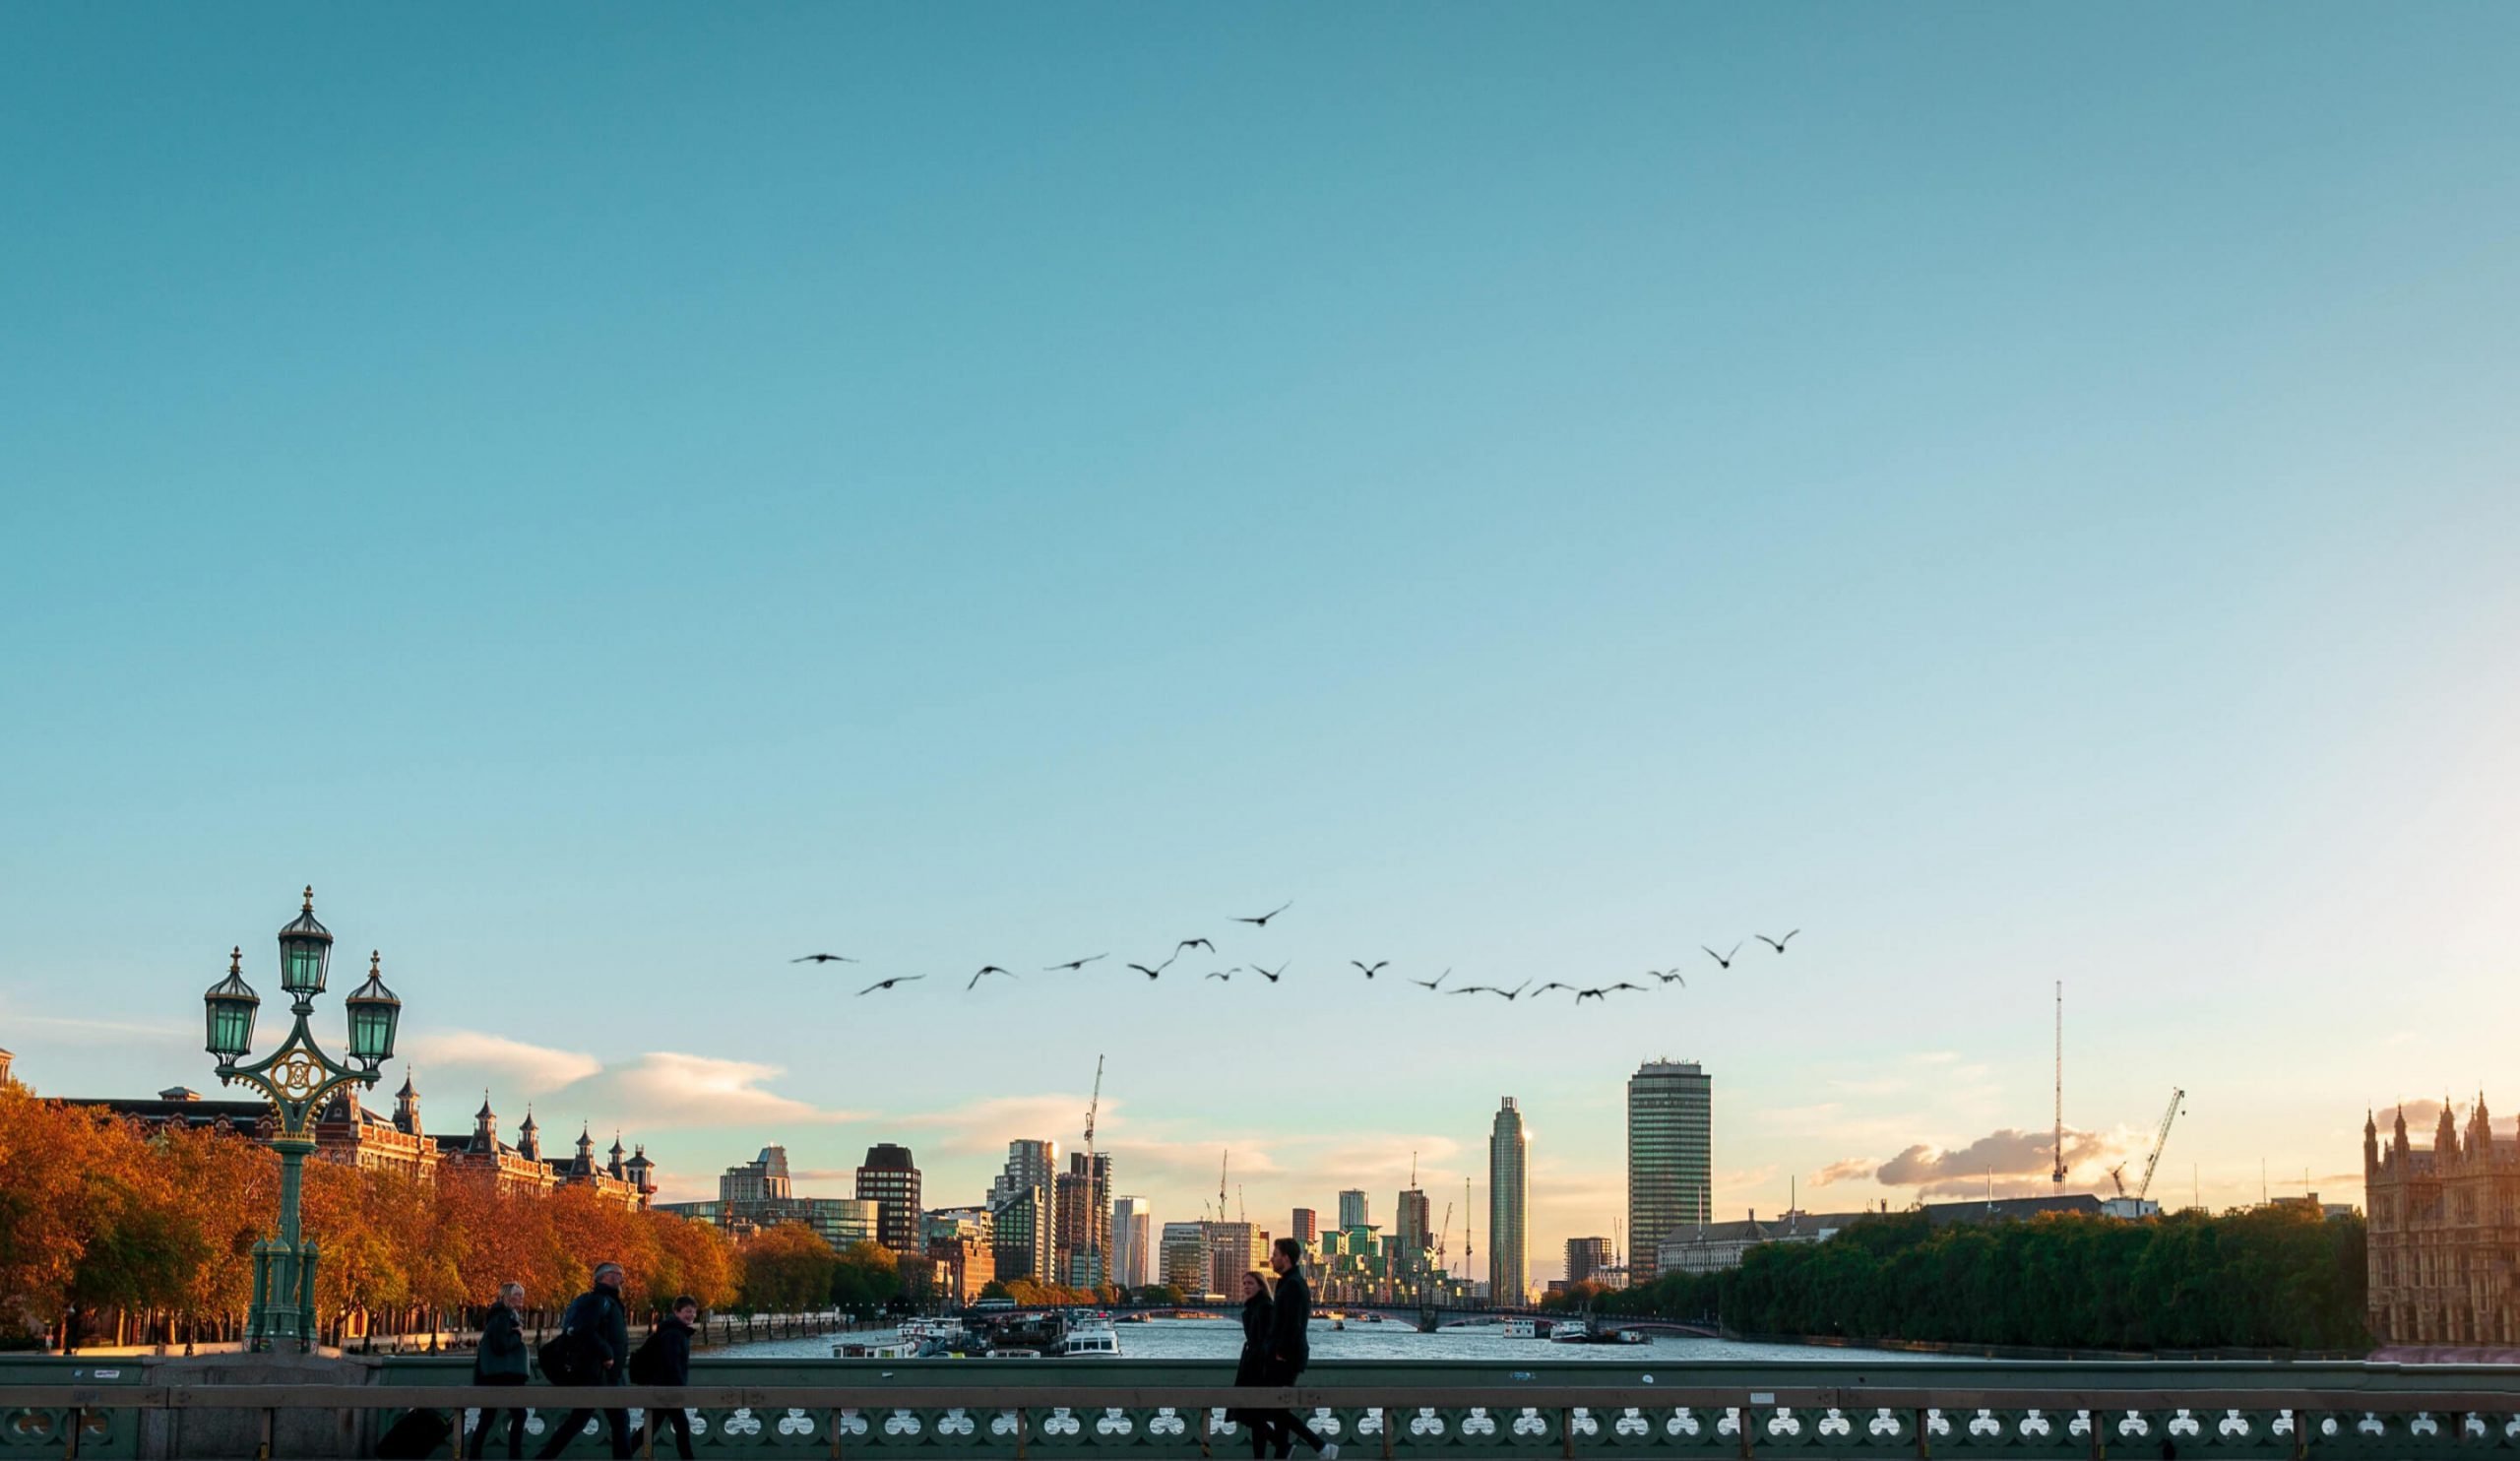 Image of a flock of birds flying over the river Thames in London